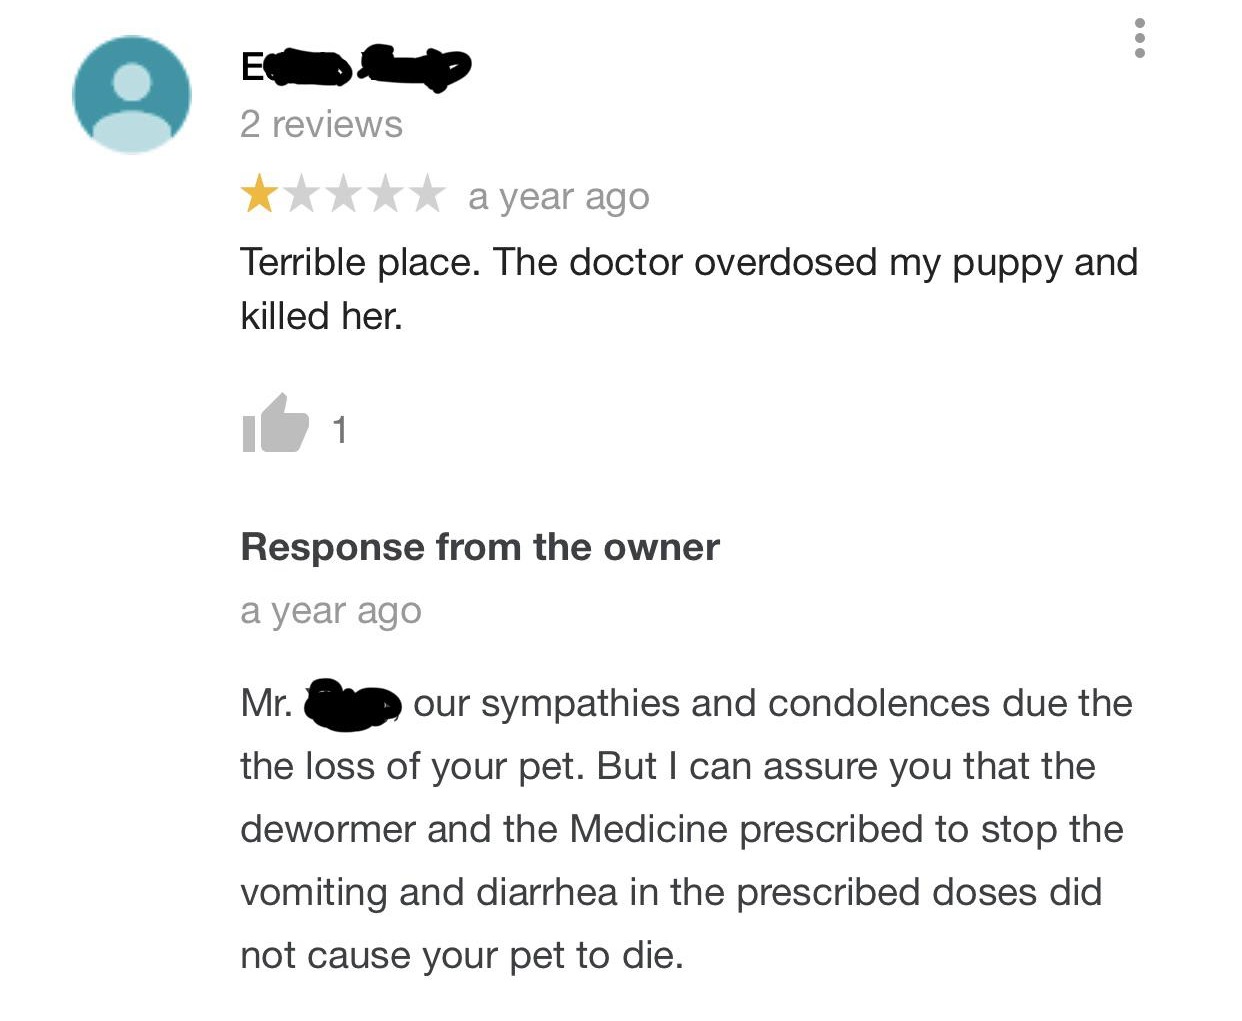 quit your bullshit - 2 reviews a year ago Terrible place. The doctor overdosed my puppy and killed her. 151 Response from the owner a year ago Mr. our sympathies and condolences due the the loss of your pet. But I can assure you that the dewormer and the